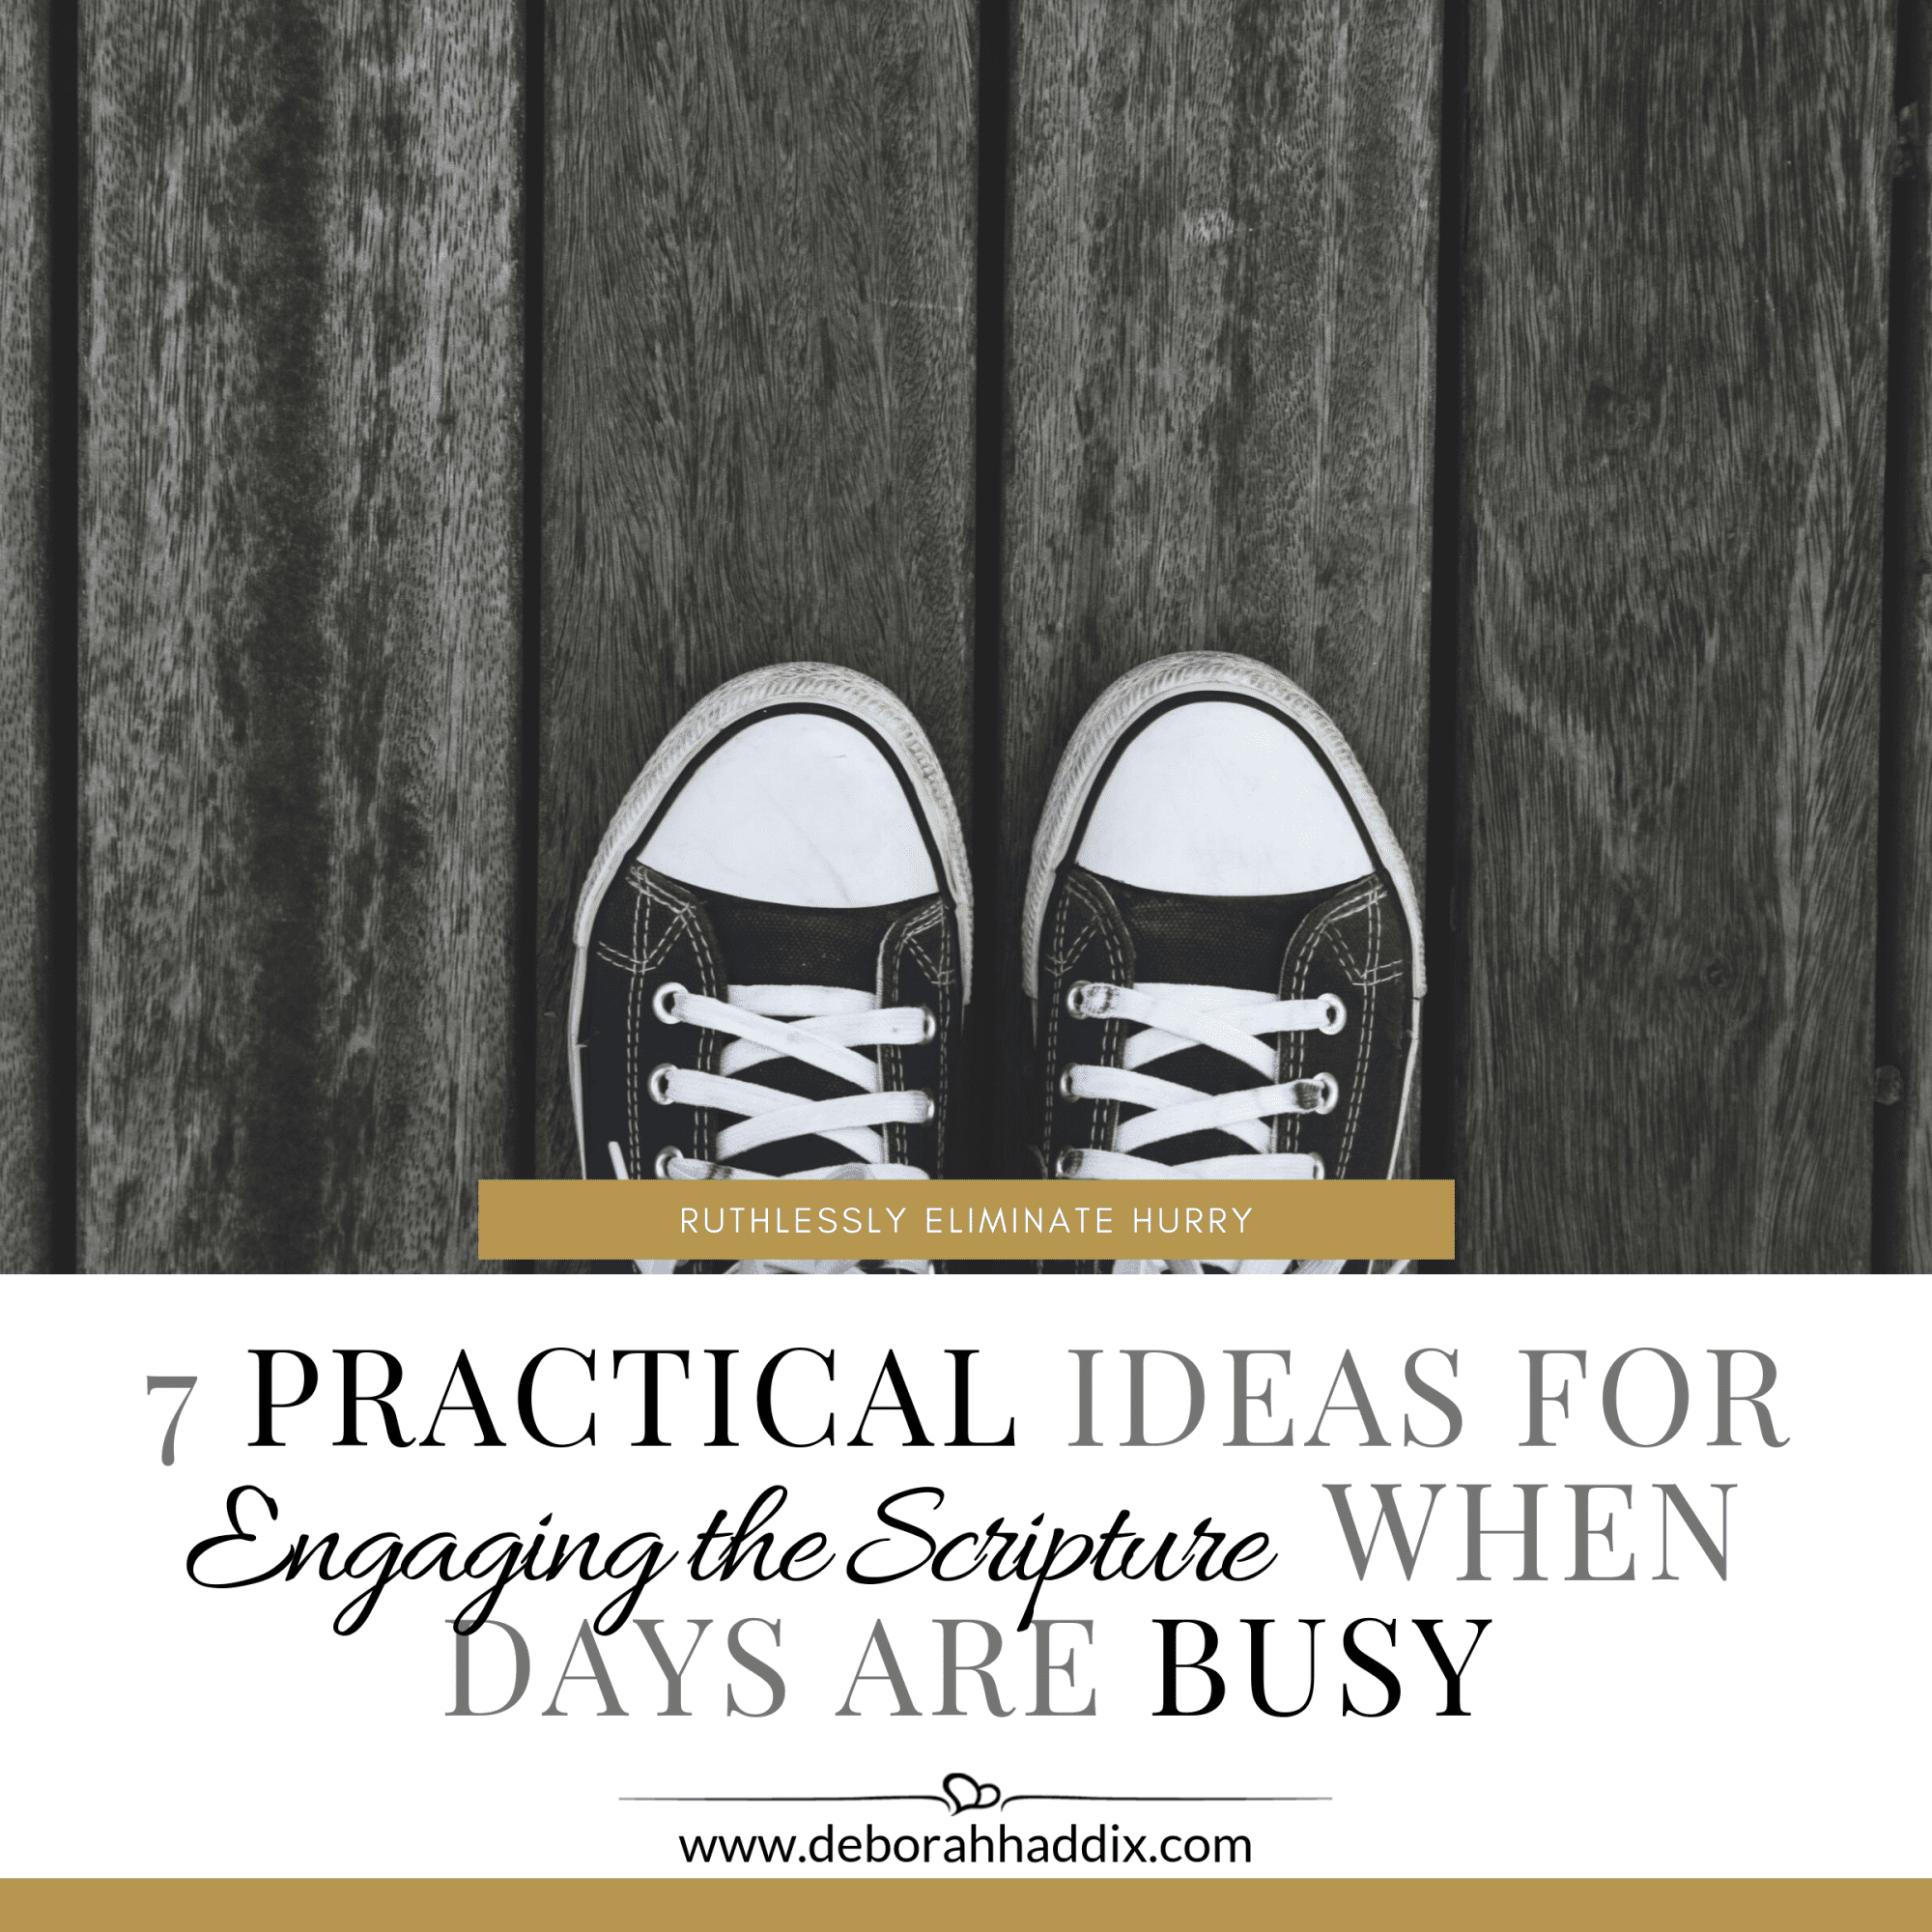 7 Practical Ideas for Engaging the Scripture When Days are Busy